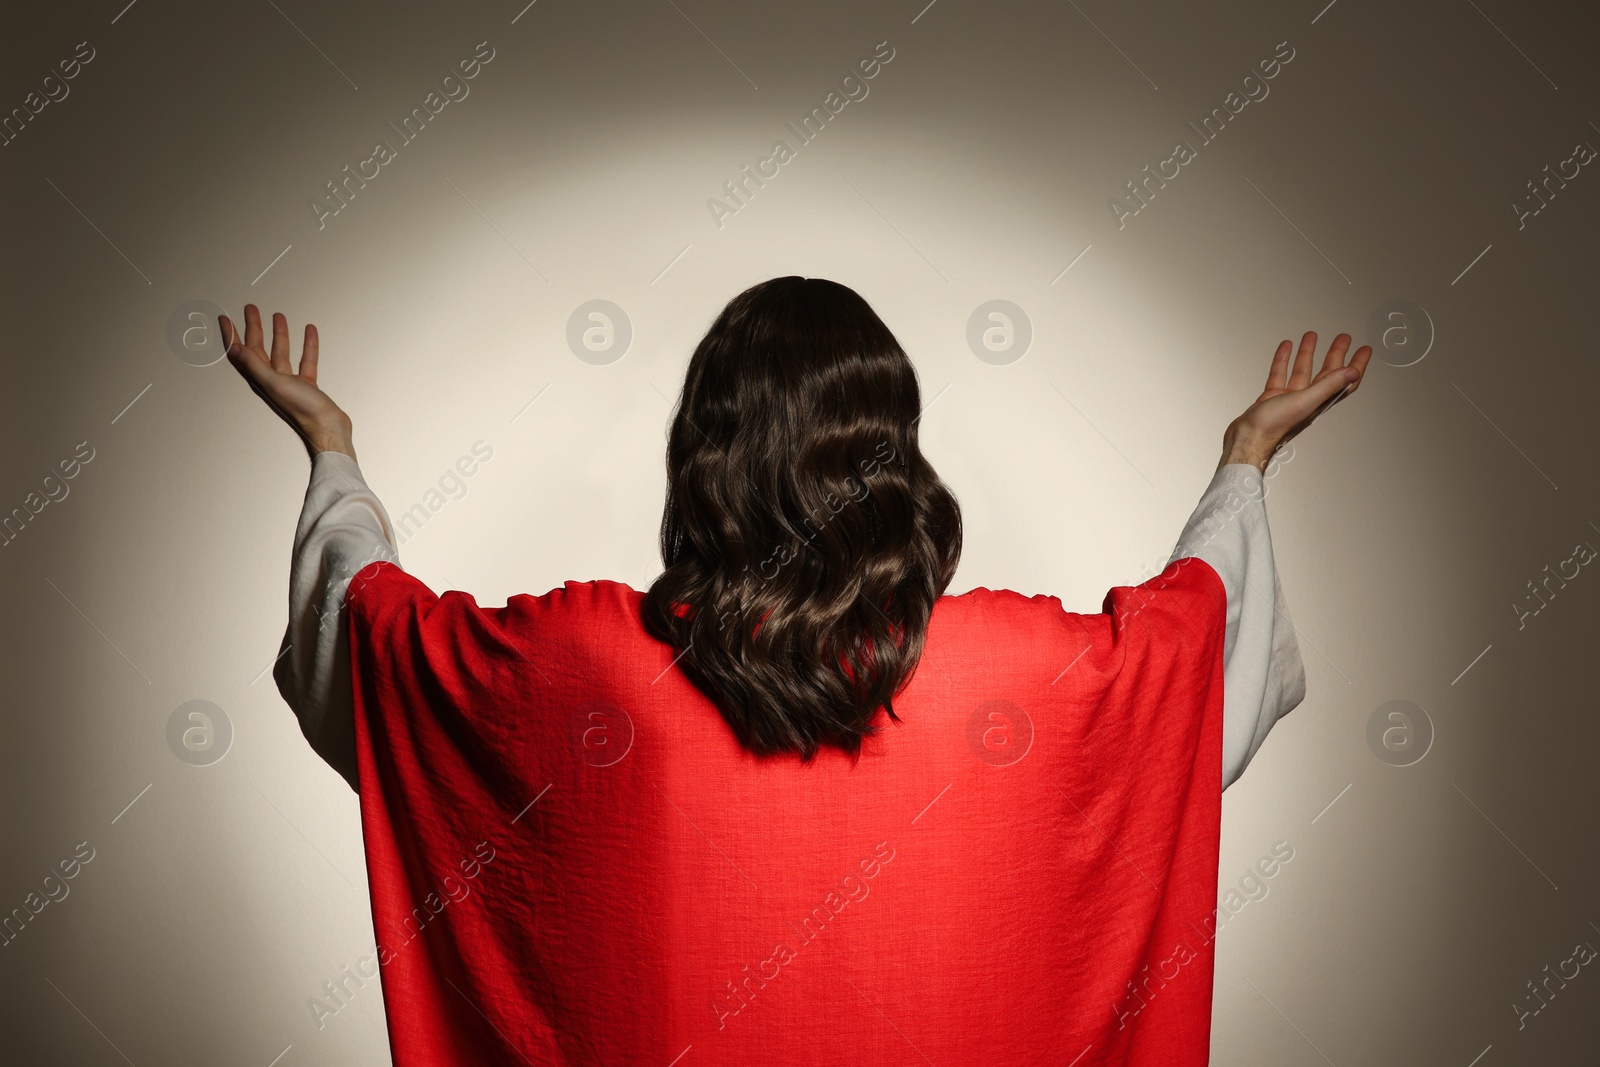 Photo of Jesus Christ with outstretched arms on beige background, back view